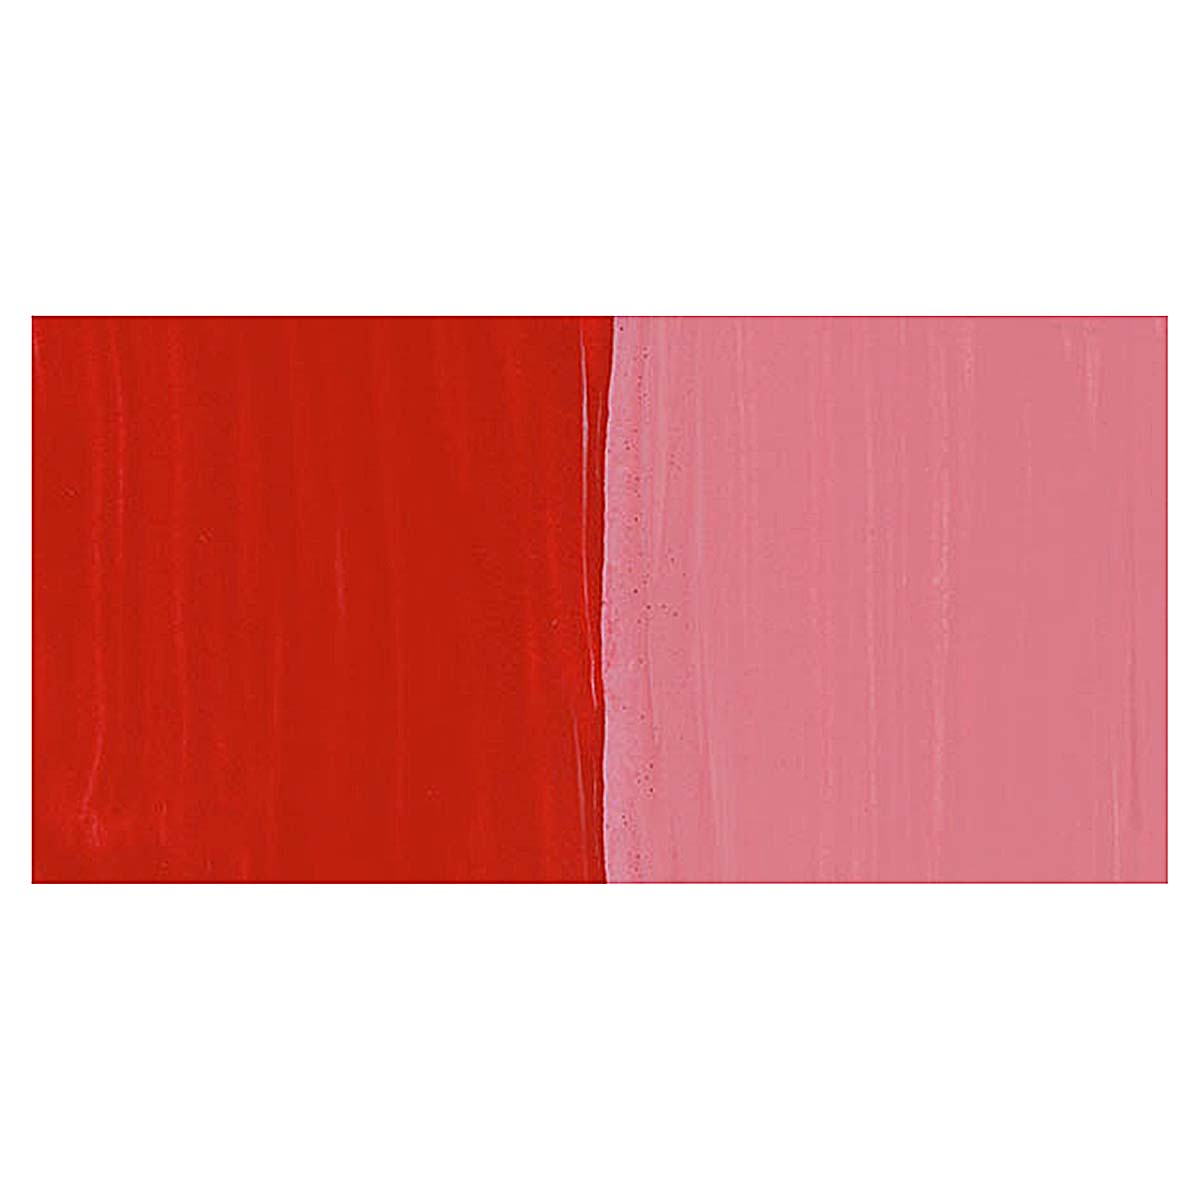 Americana Acrylic Paint 2oz-Tuscan Red - Semi-Opaque, 1 count - Kroger